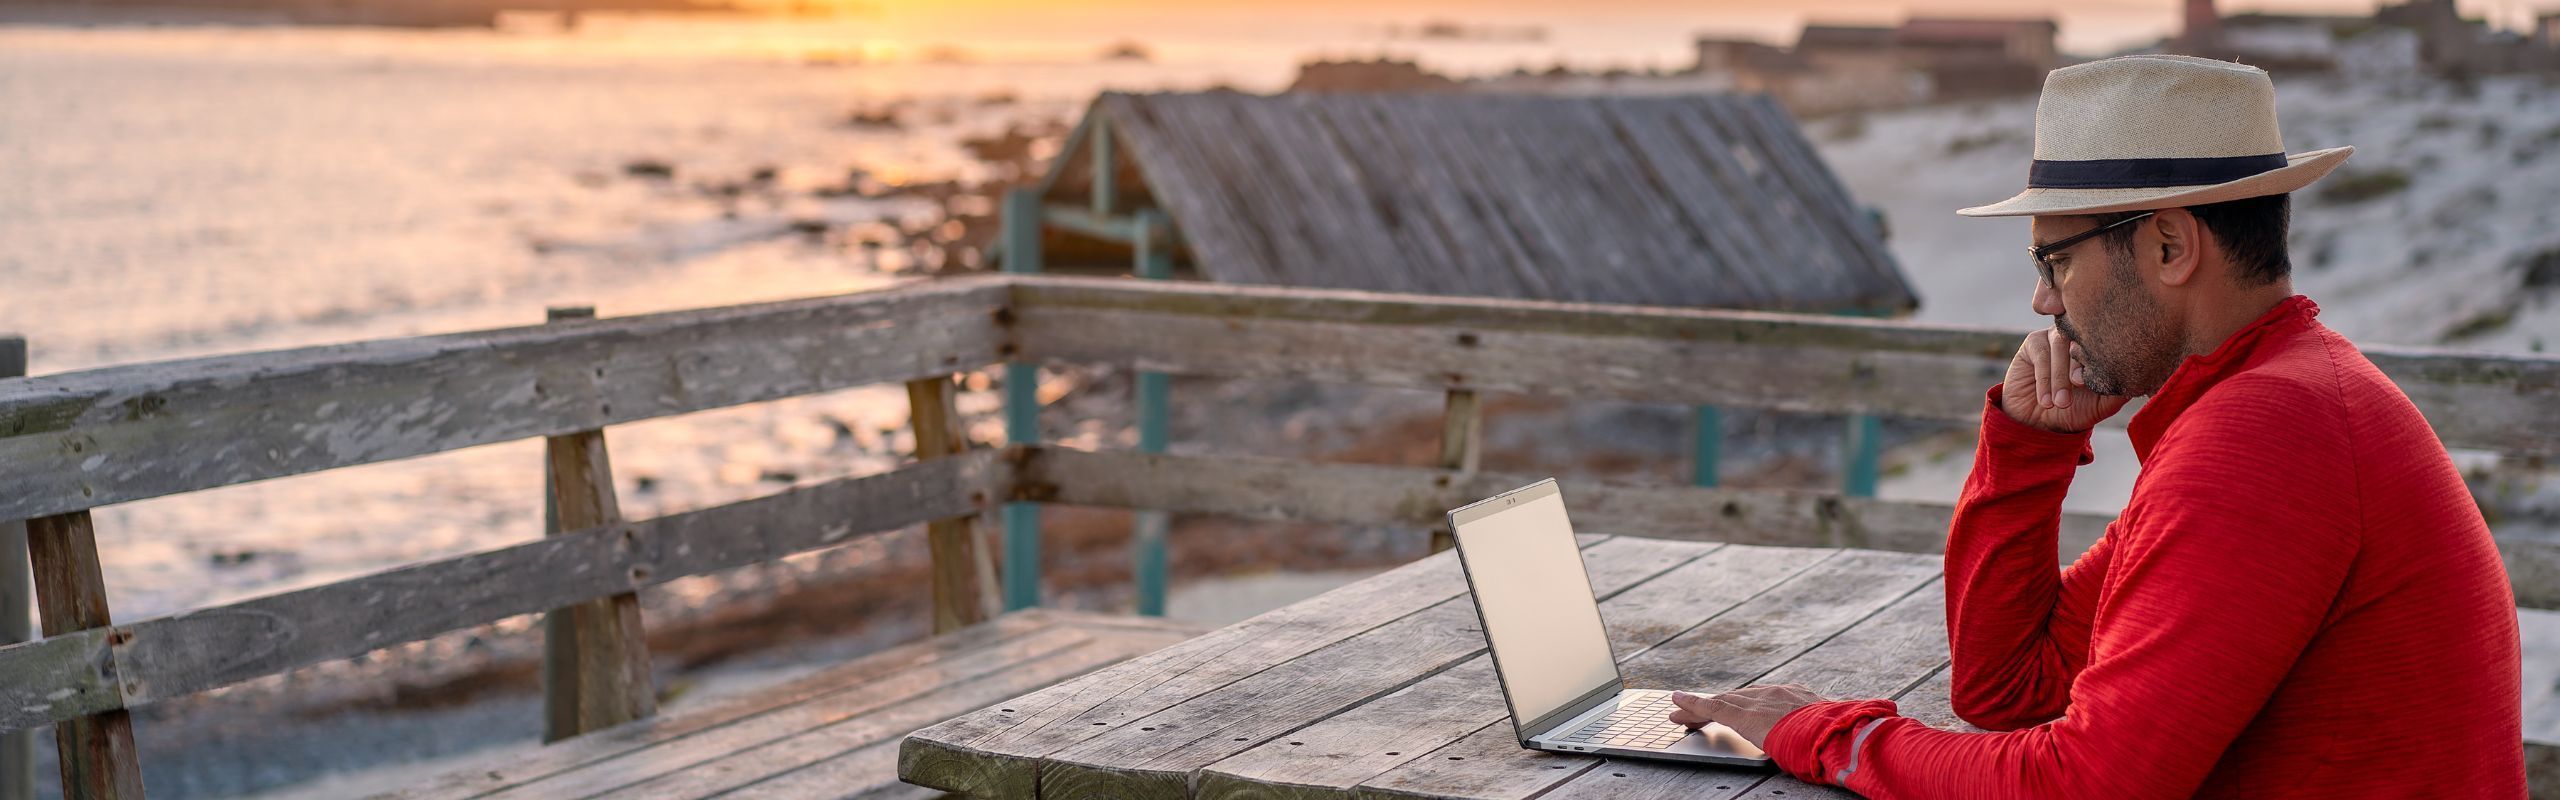 HR Daily Advisor: HR in the Age of Remote Work and Digital Nomads